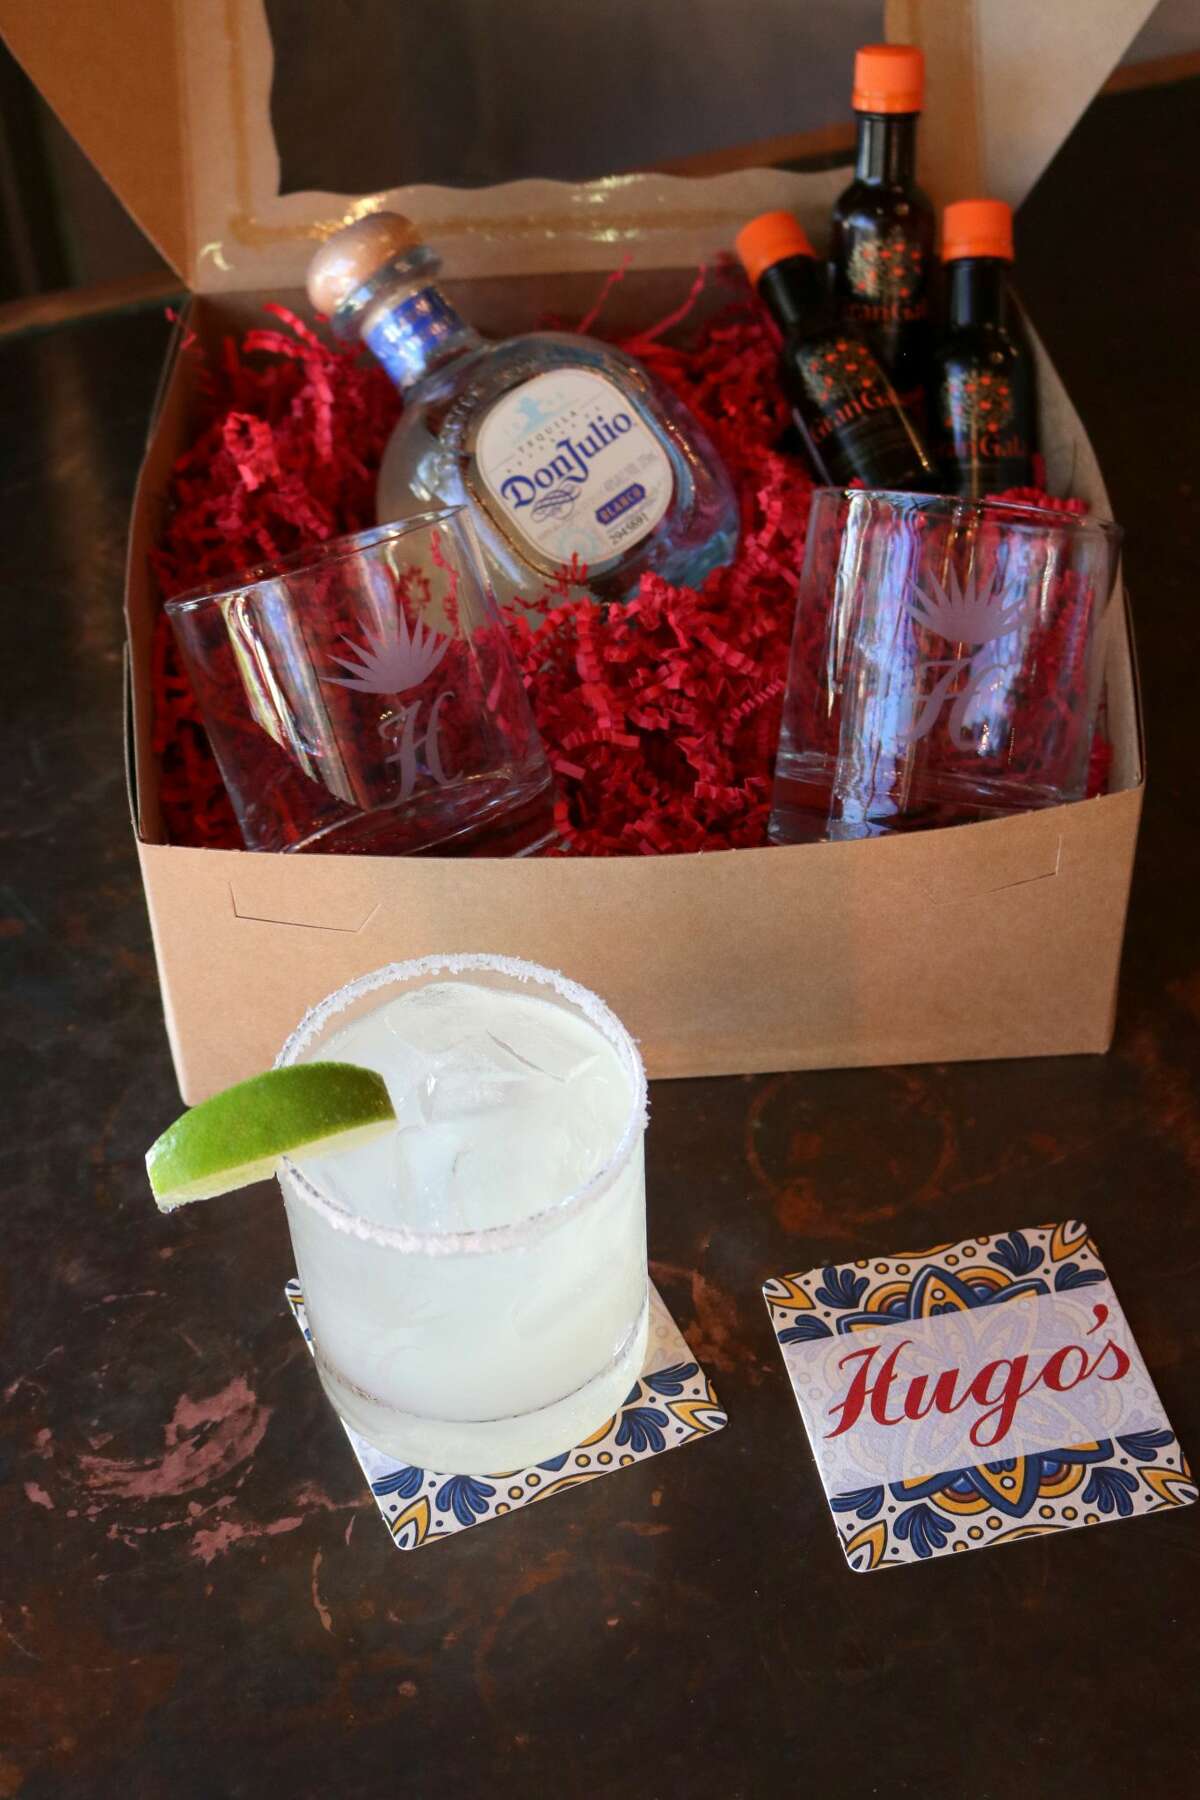 For the cocktail mixer: You know the one: they always end up mixing up drinks at gatherings, demonstrating proper techniques and reveling in the party's spotlight. This pack, from Montrose restaurant Hugo's, has everything you need for a fool-proof margarita (instructions and all) for $65. That includes the logo glasses and liquor, a 375ml bottle of Don Julio Blanco Tequila and three bottles of Gran Gala orange liqueur. Order online here.